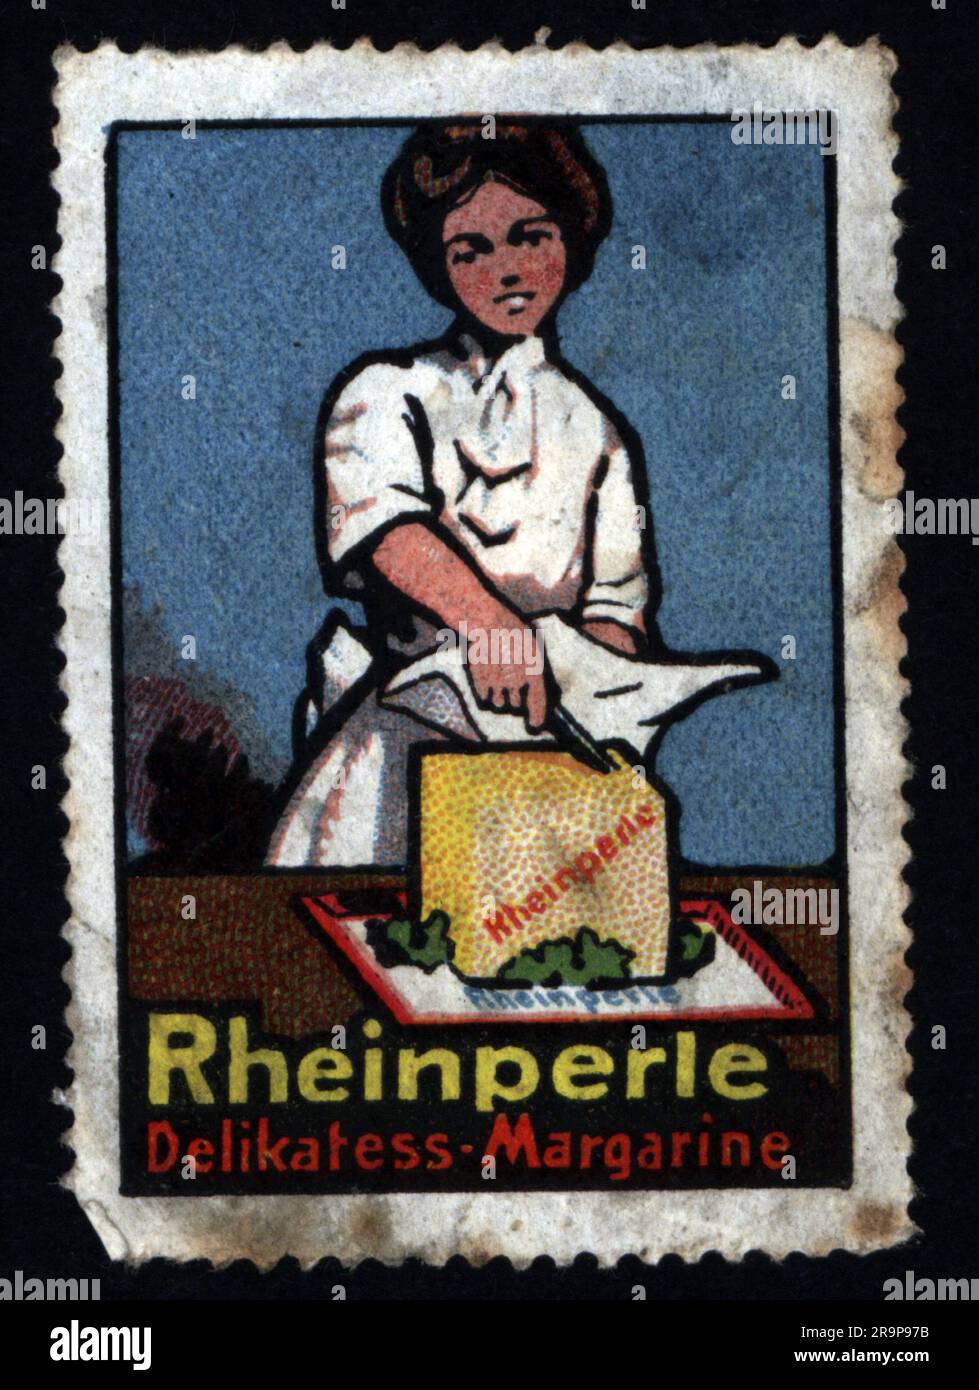 advertising, food, Rheinperle delicacy margarine, poster stamp, circa 1900, ADDITIONAL-RIGHTS-CLEARANCE-INFO-NOT-AVAILABLE Stock Photo